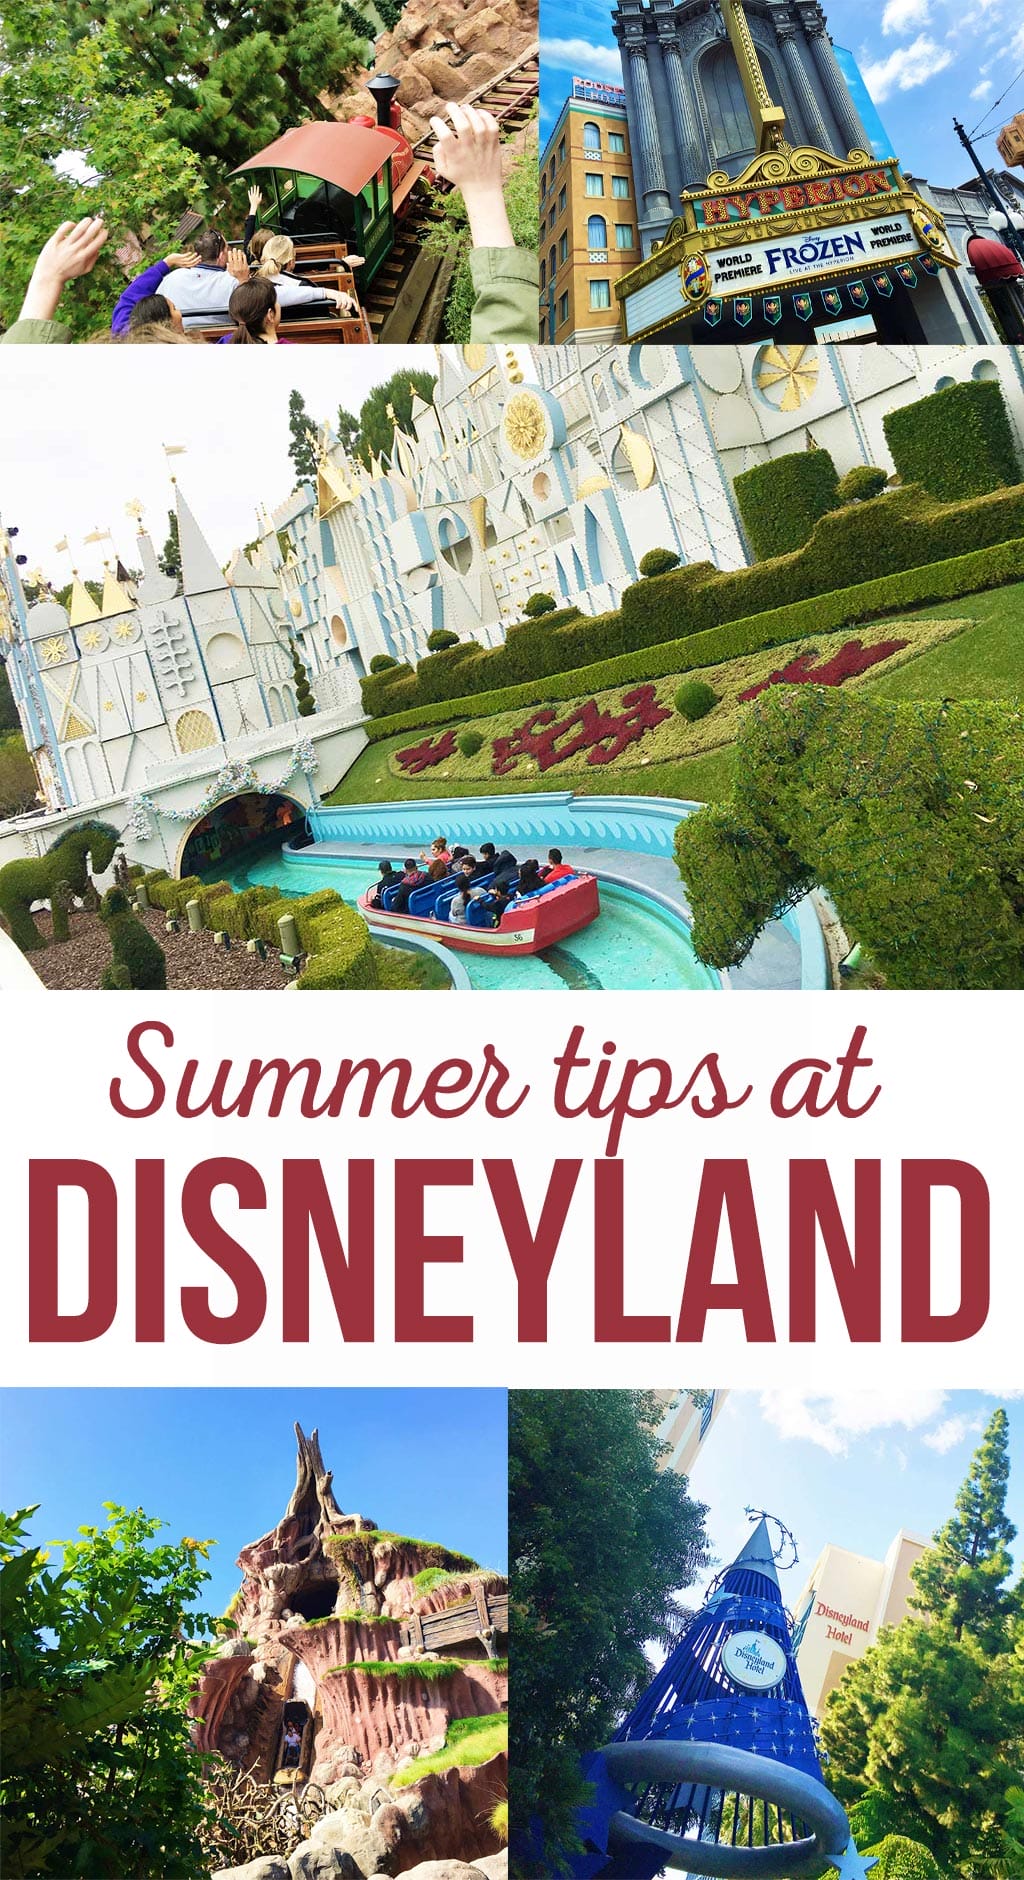 Find out how to beat the heat at Disneyland during summer. Learn about the best rides, treats and tricks for staying cool on a hot day.